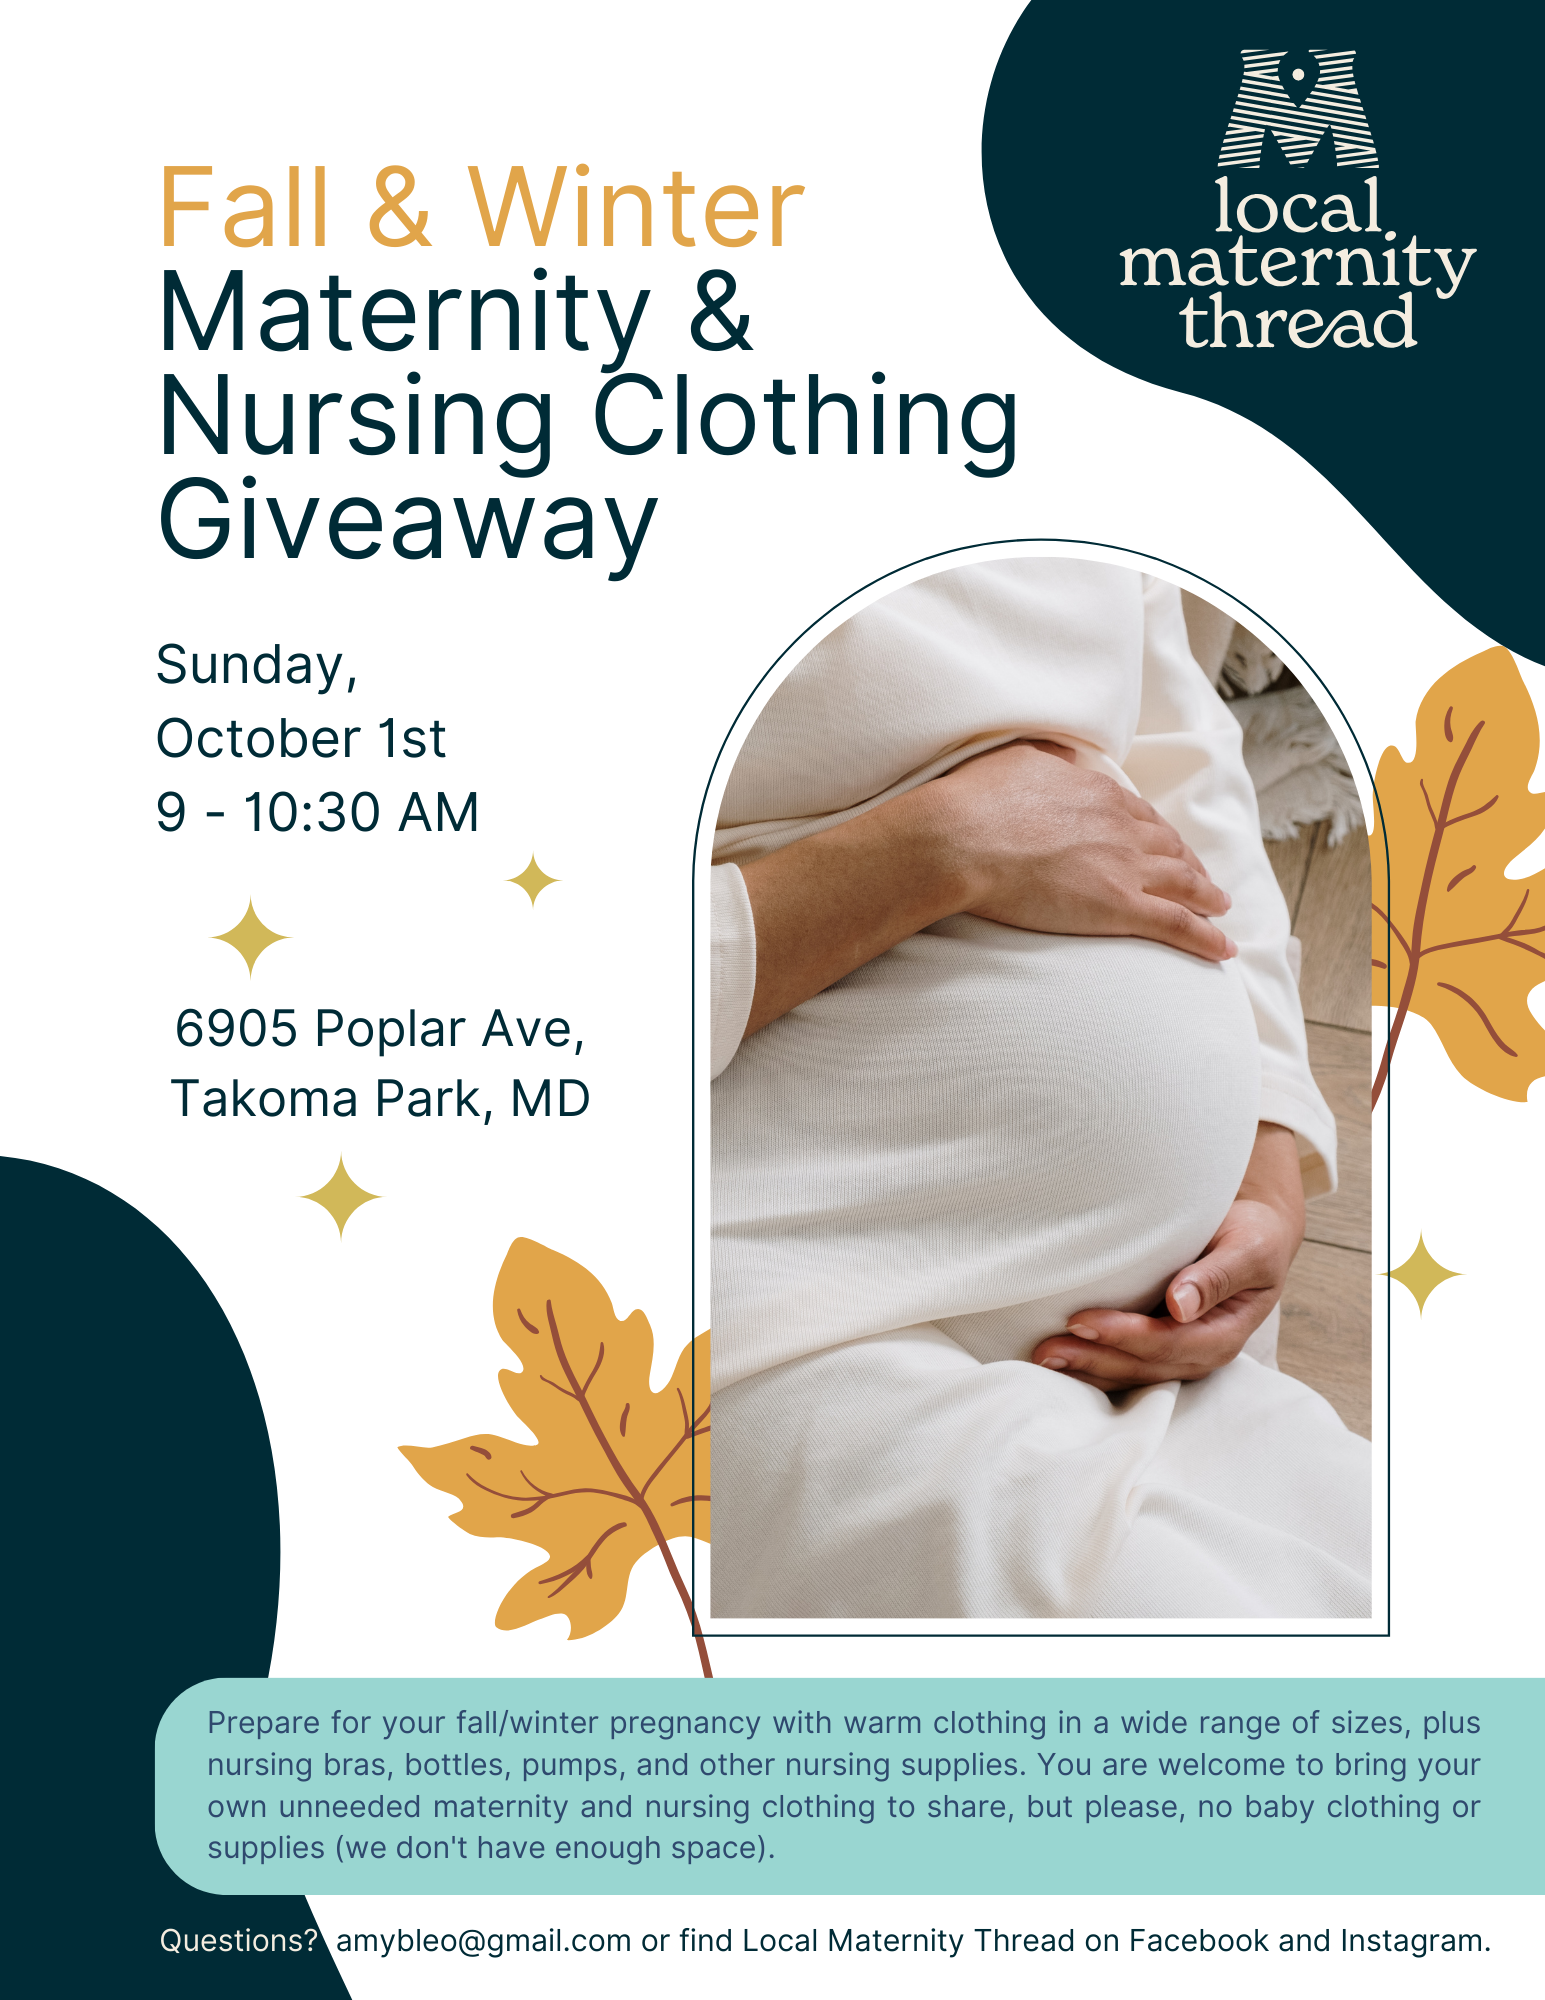 https://mainstreettakoma.org/wp-content/uploads/2023/09/Maternity-Nursing-Clothing-Giveaway-1-1.png